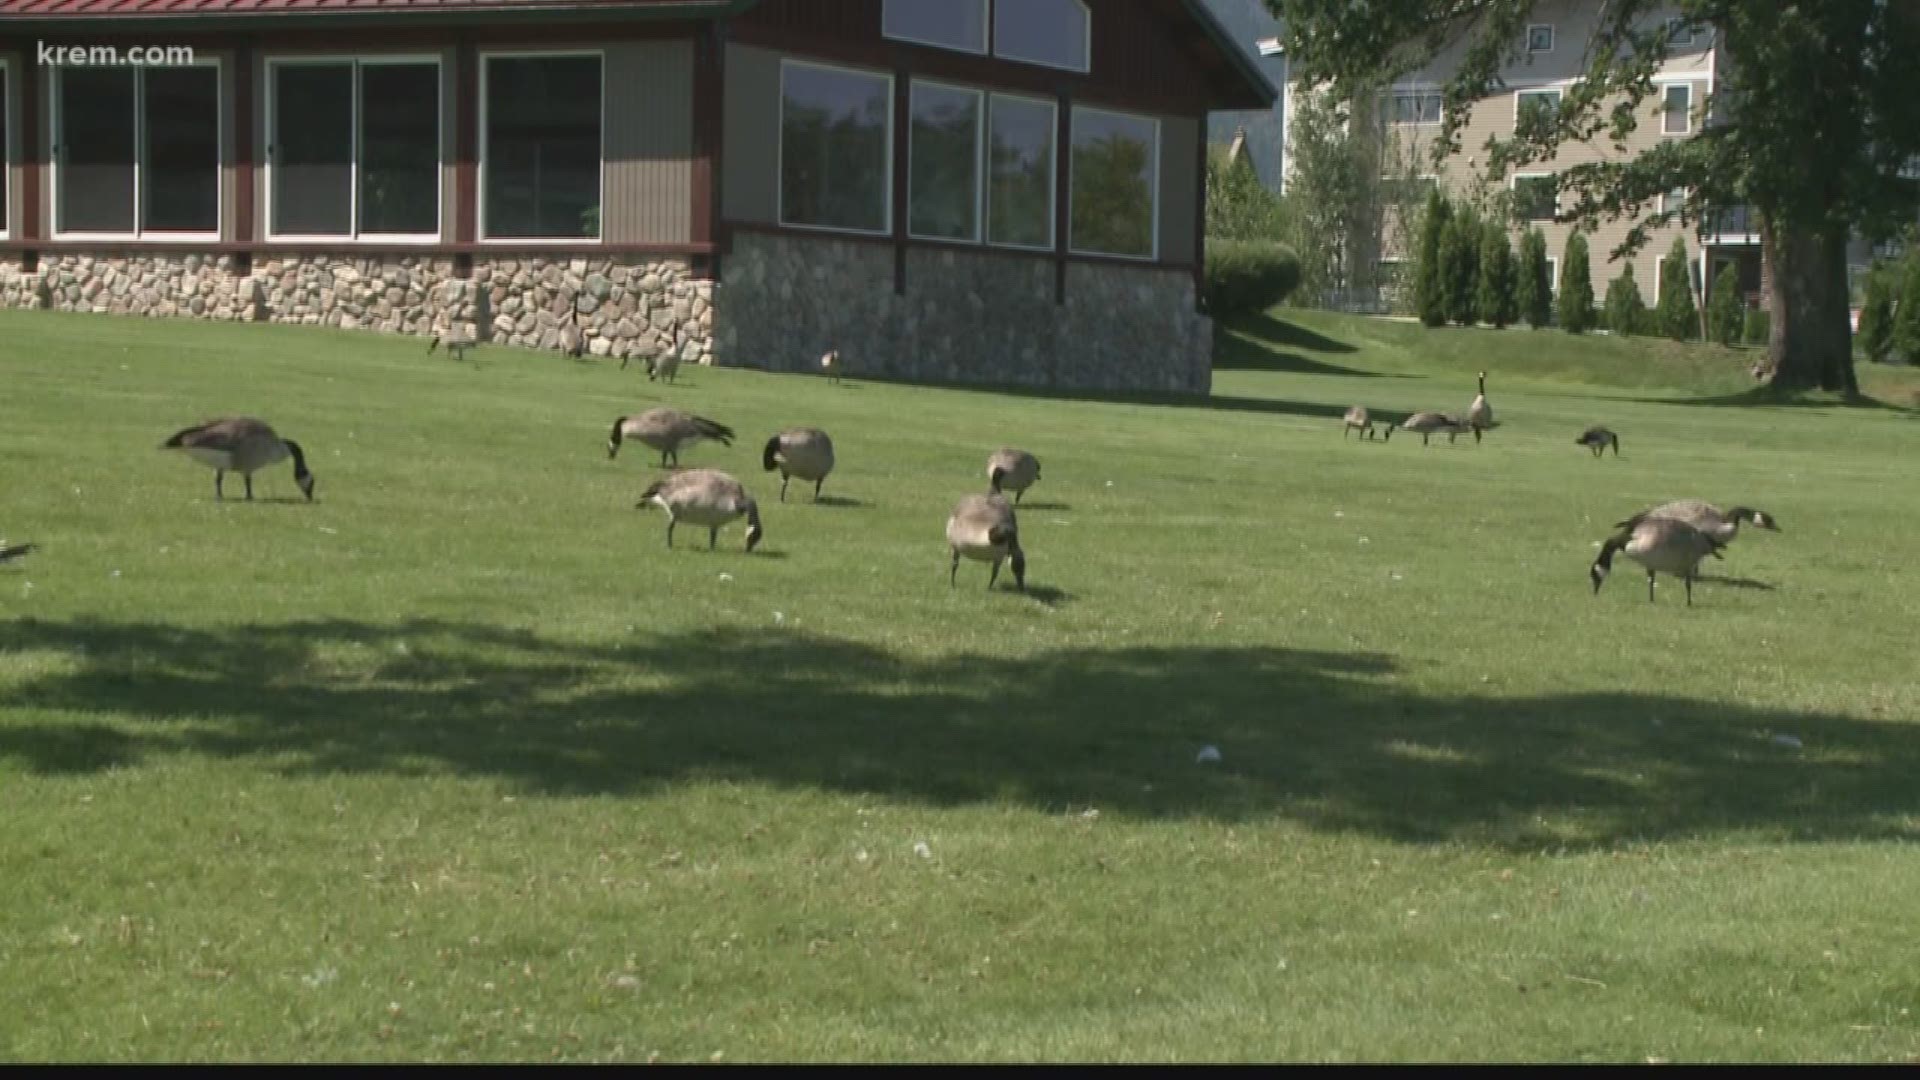 They're an annual nuisance! Back in June, the city of Sandpoint captured and relocated more than 140 geese living at city beach. The city said the birds waste was unsanitary and driving away tourists.